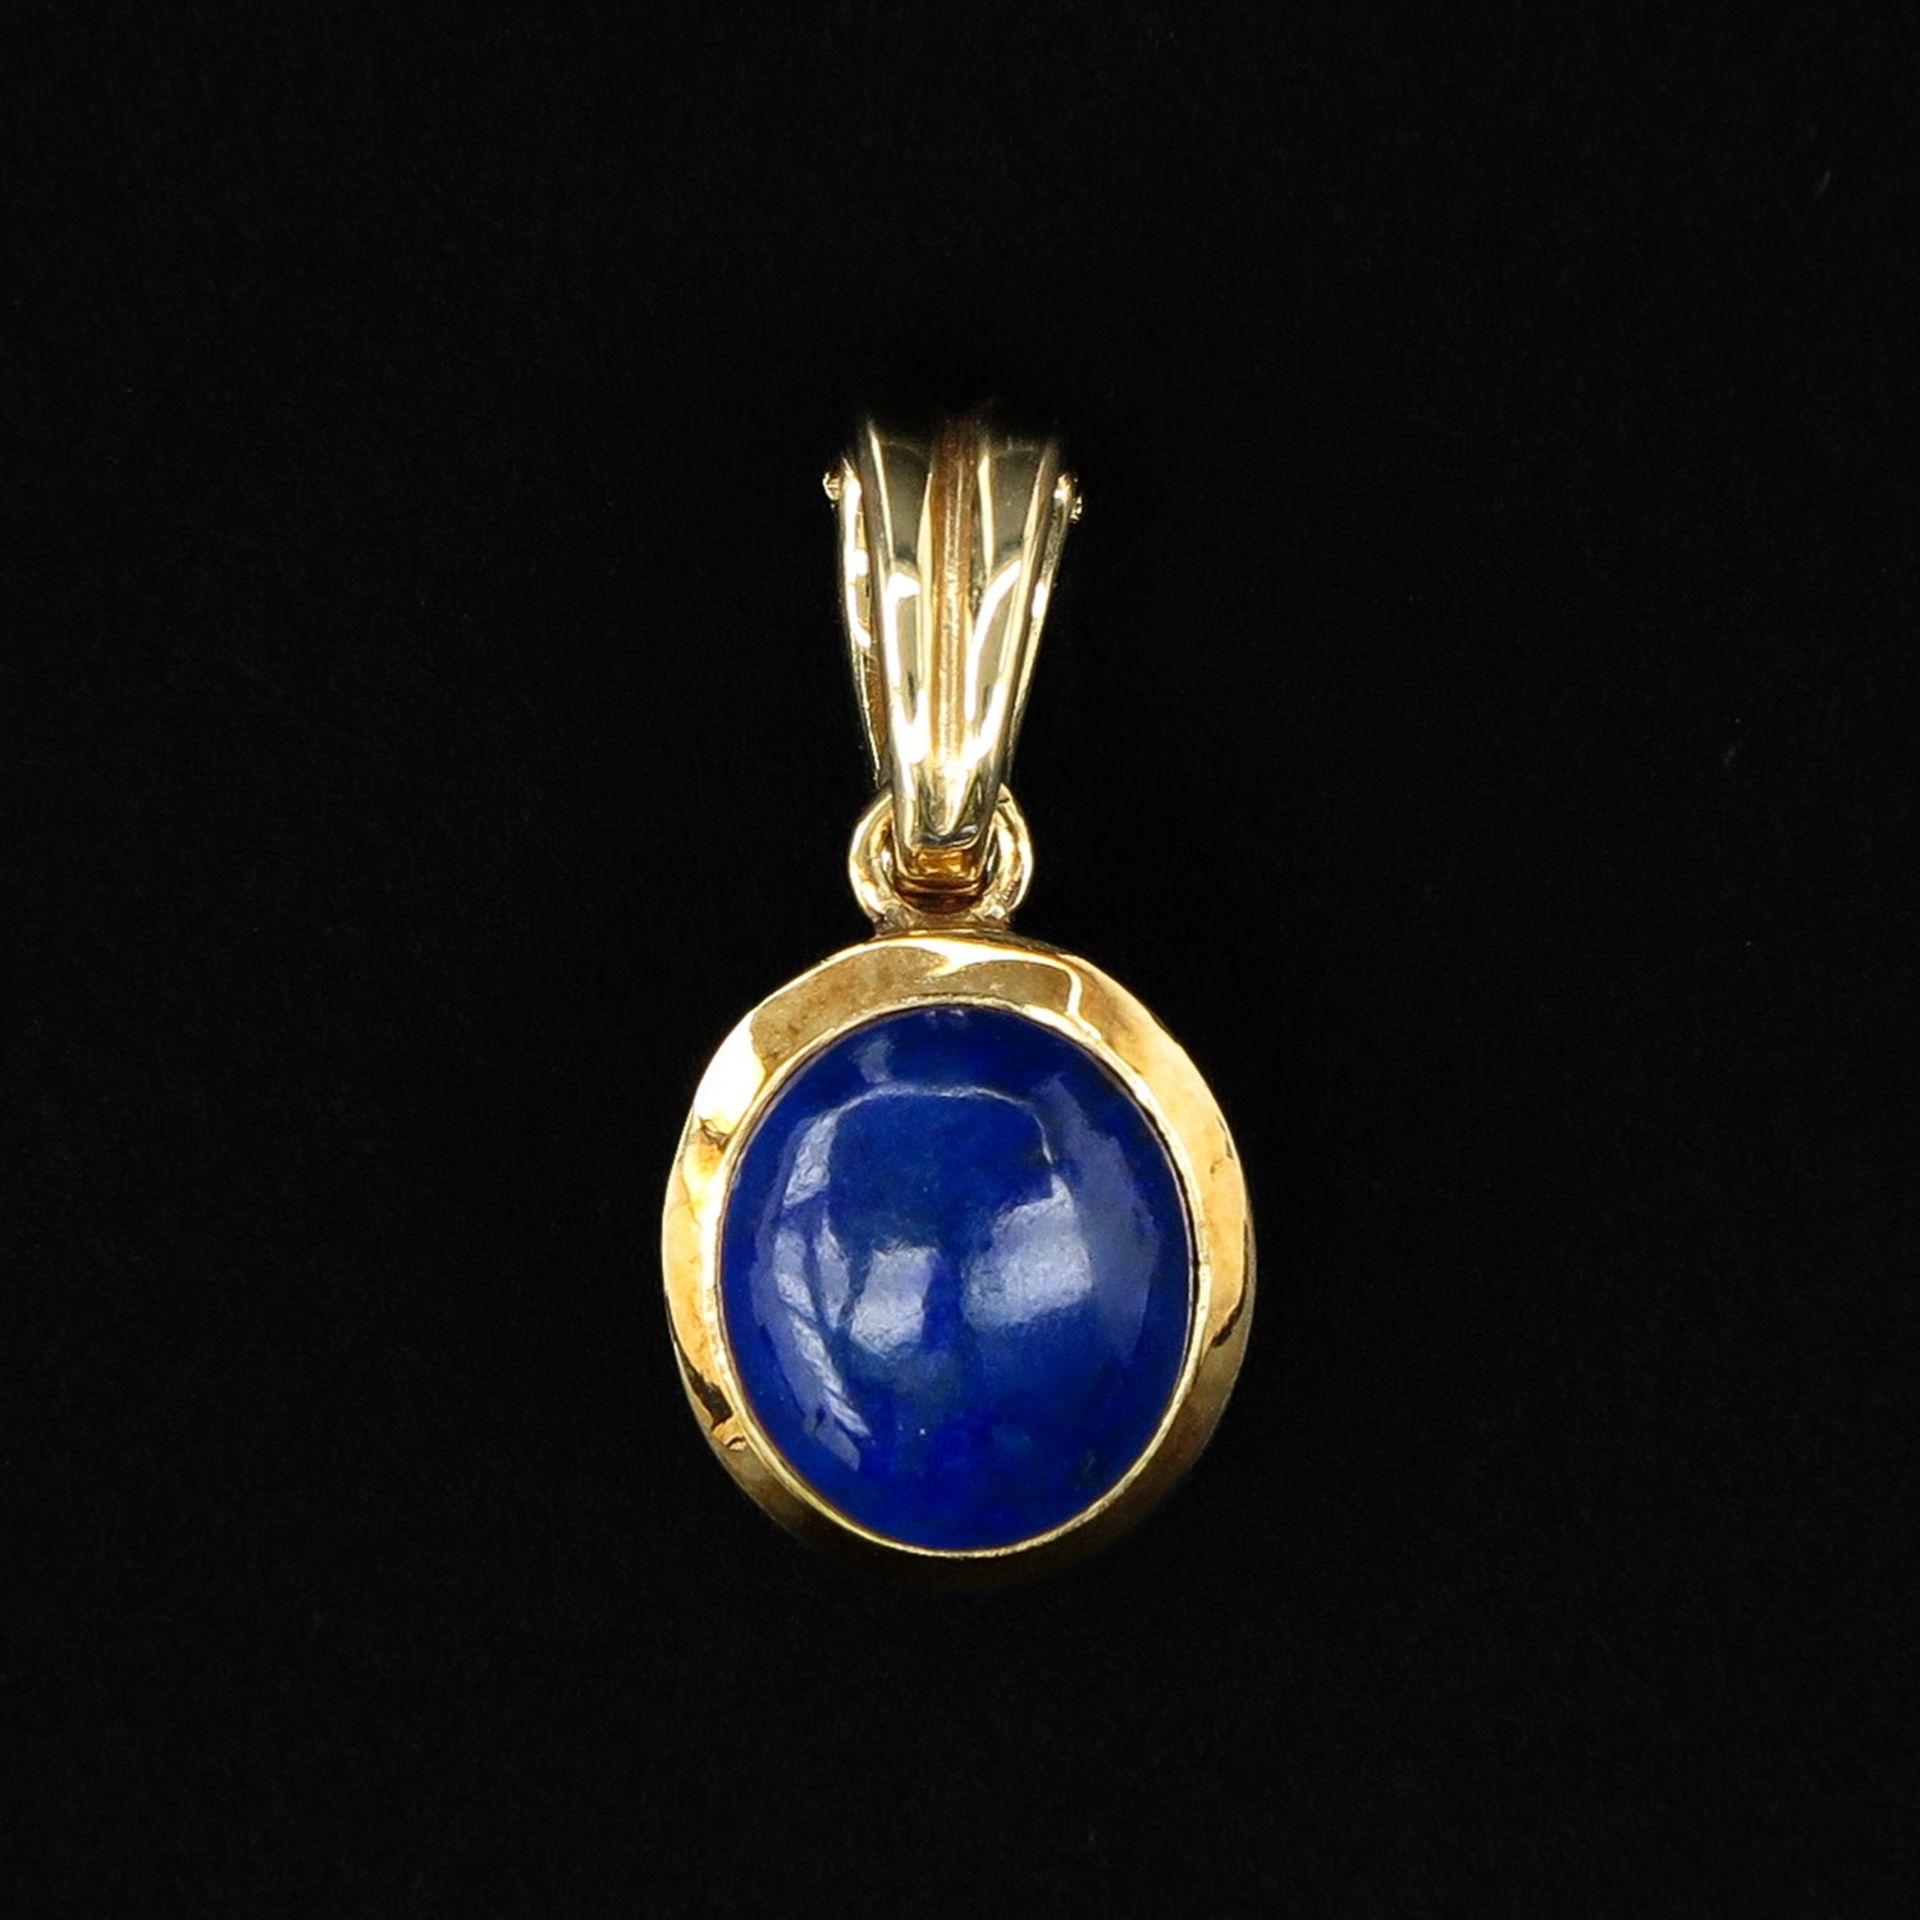 A Collection of Lapis Lazuli Jewelry - Image 8 of 10